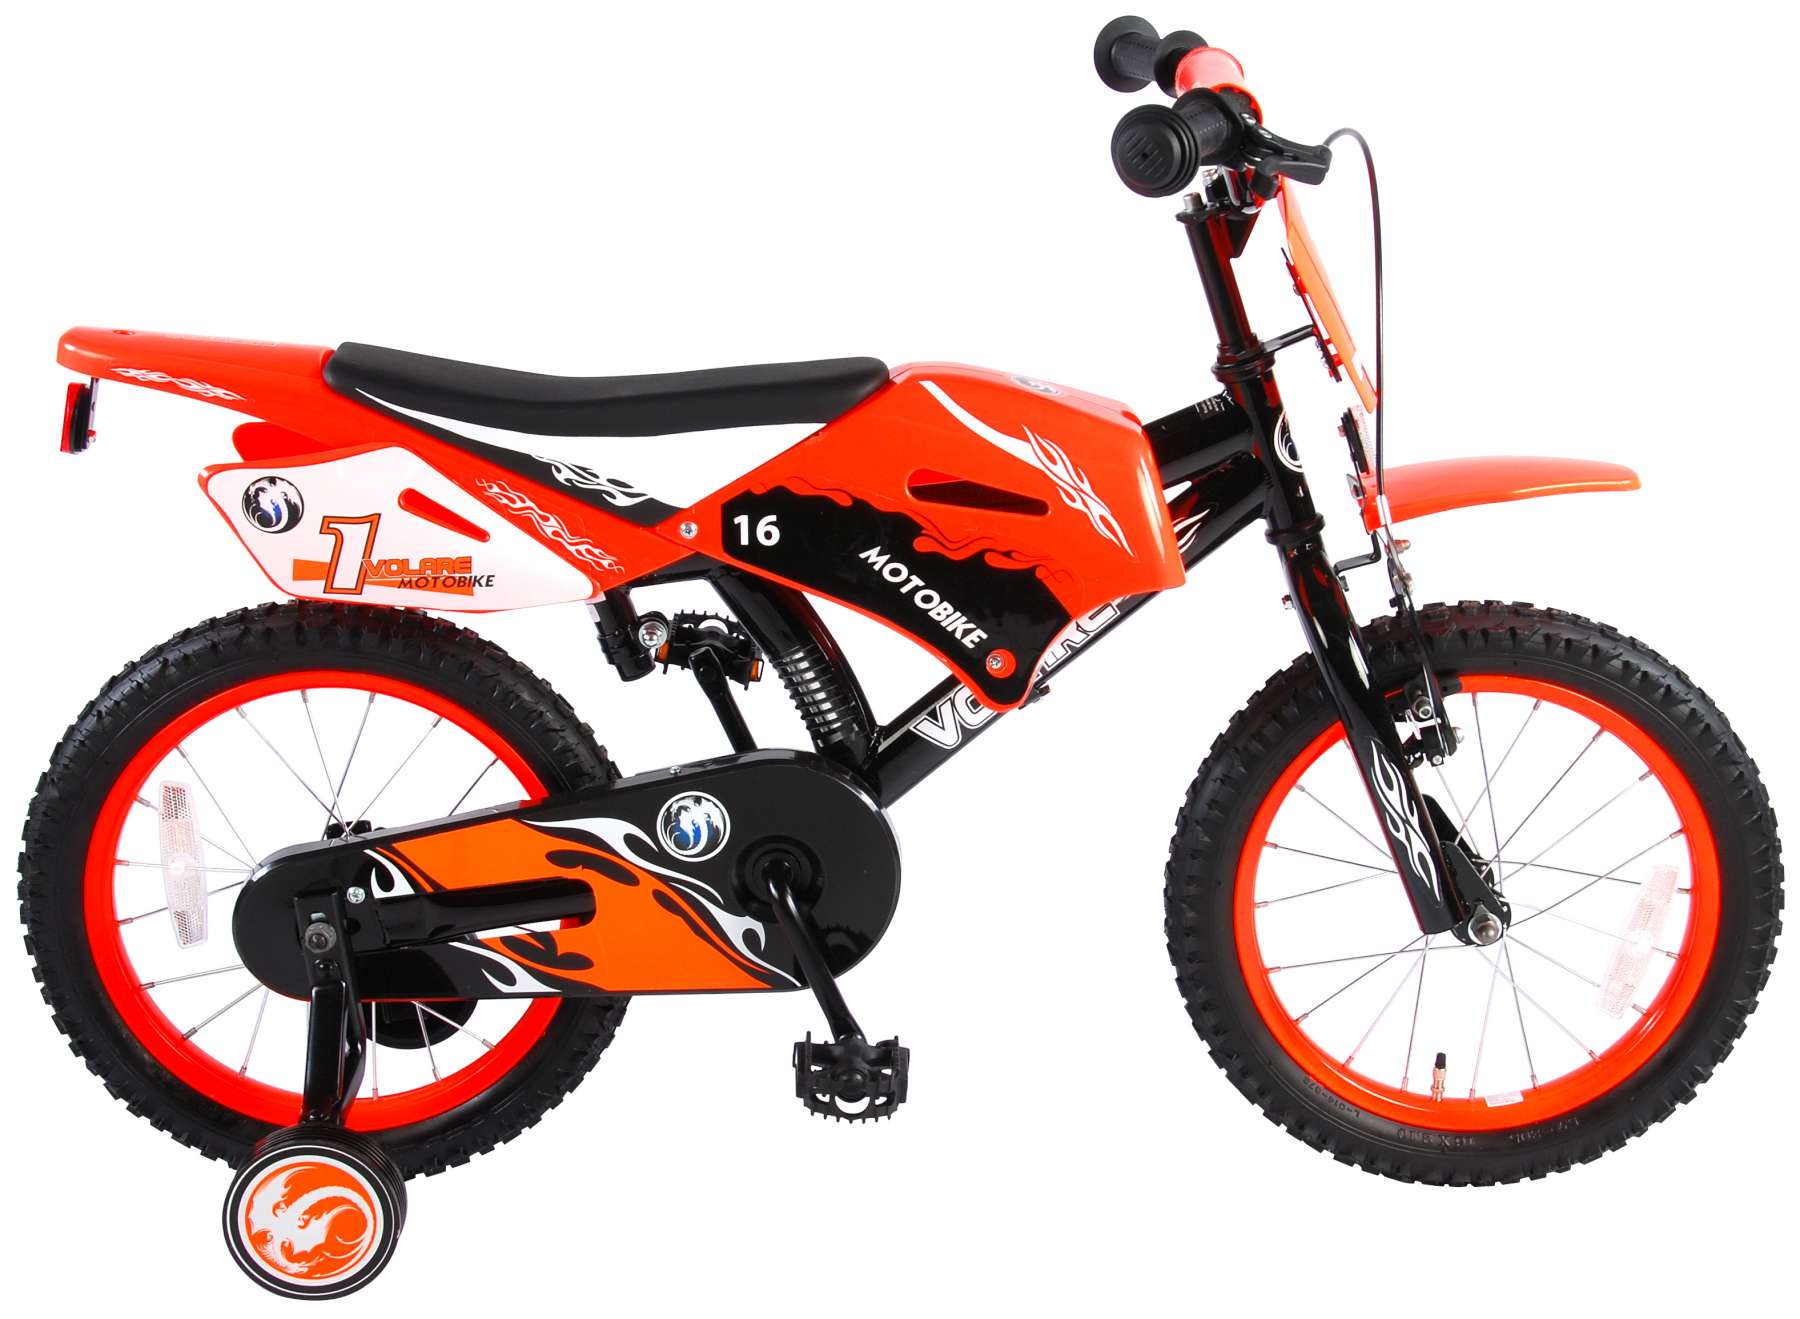 StyleBest 16 Motorbike Bike for Kids,Boys Girls Children Bicycle,Children Bicycle with Mudguards and V-Brake,Motorbike design 2-8 Years Old